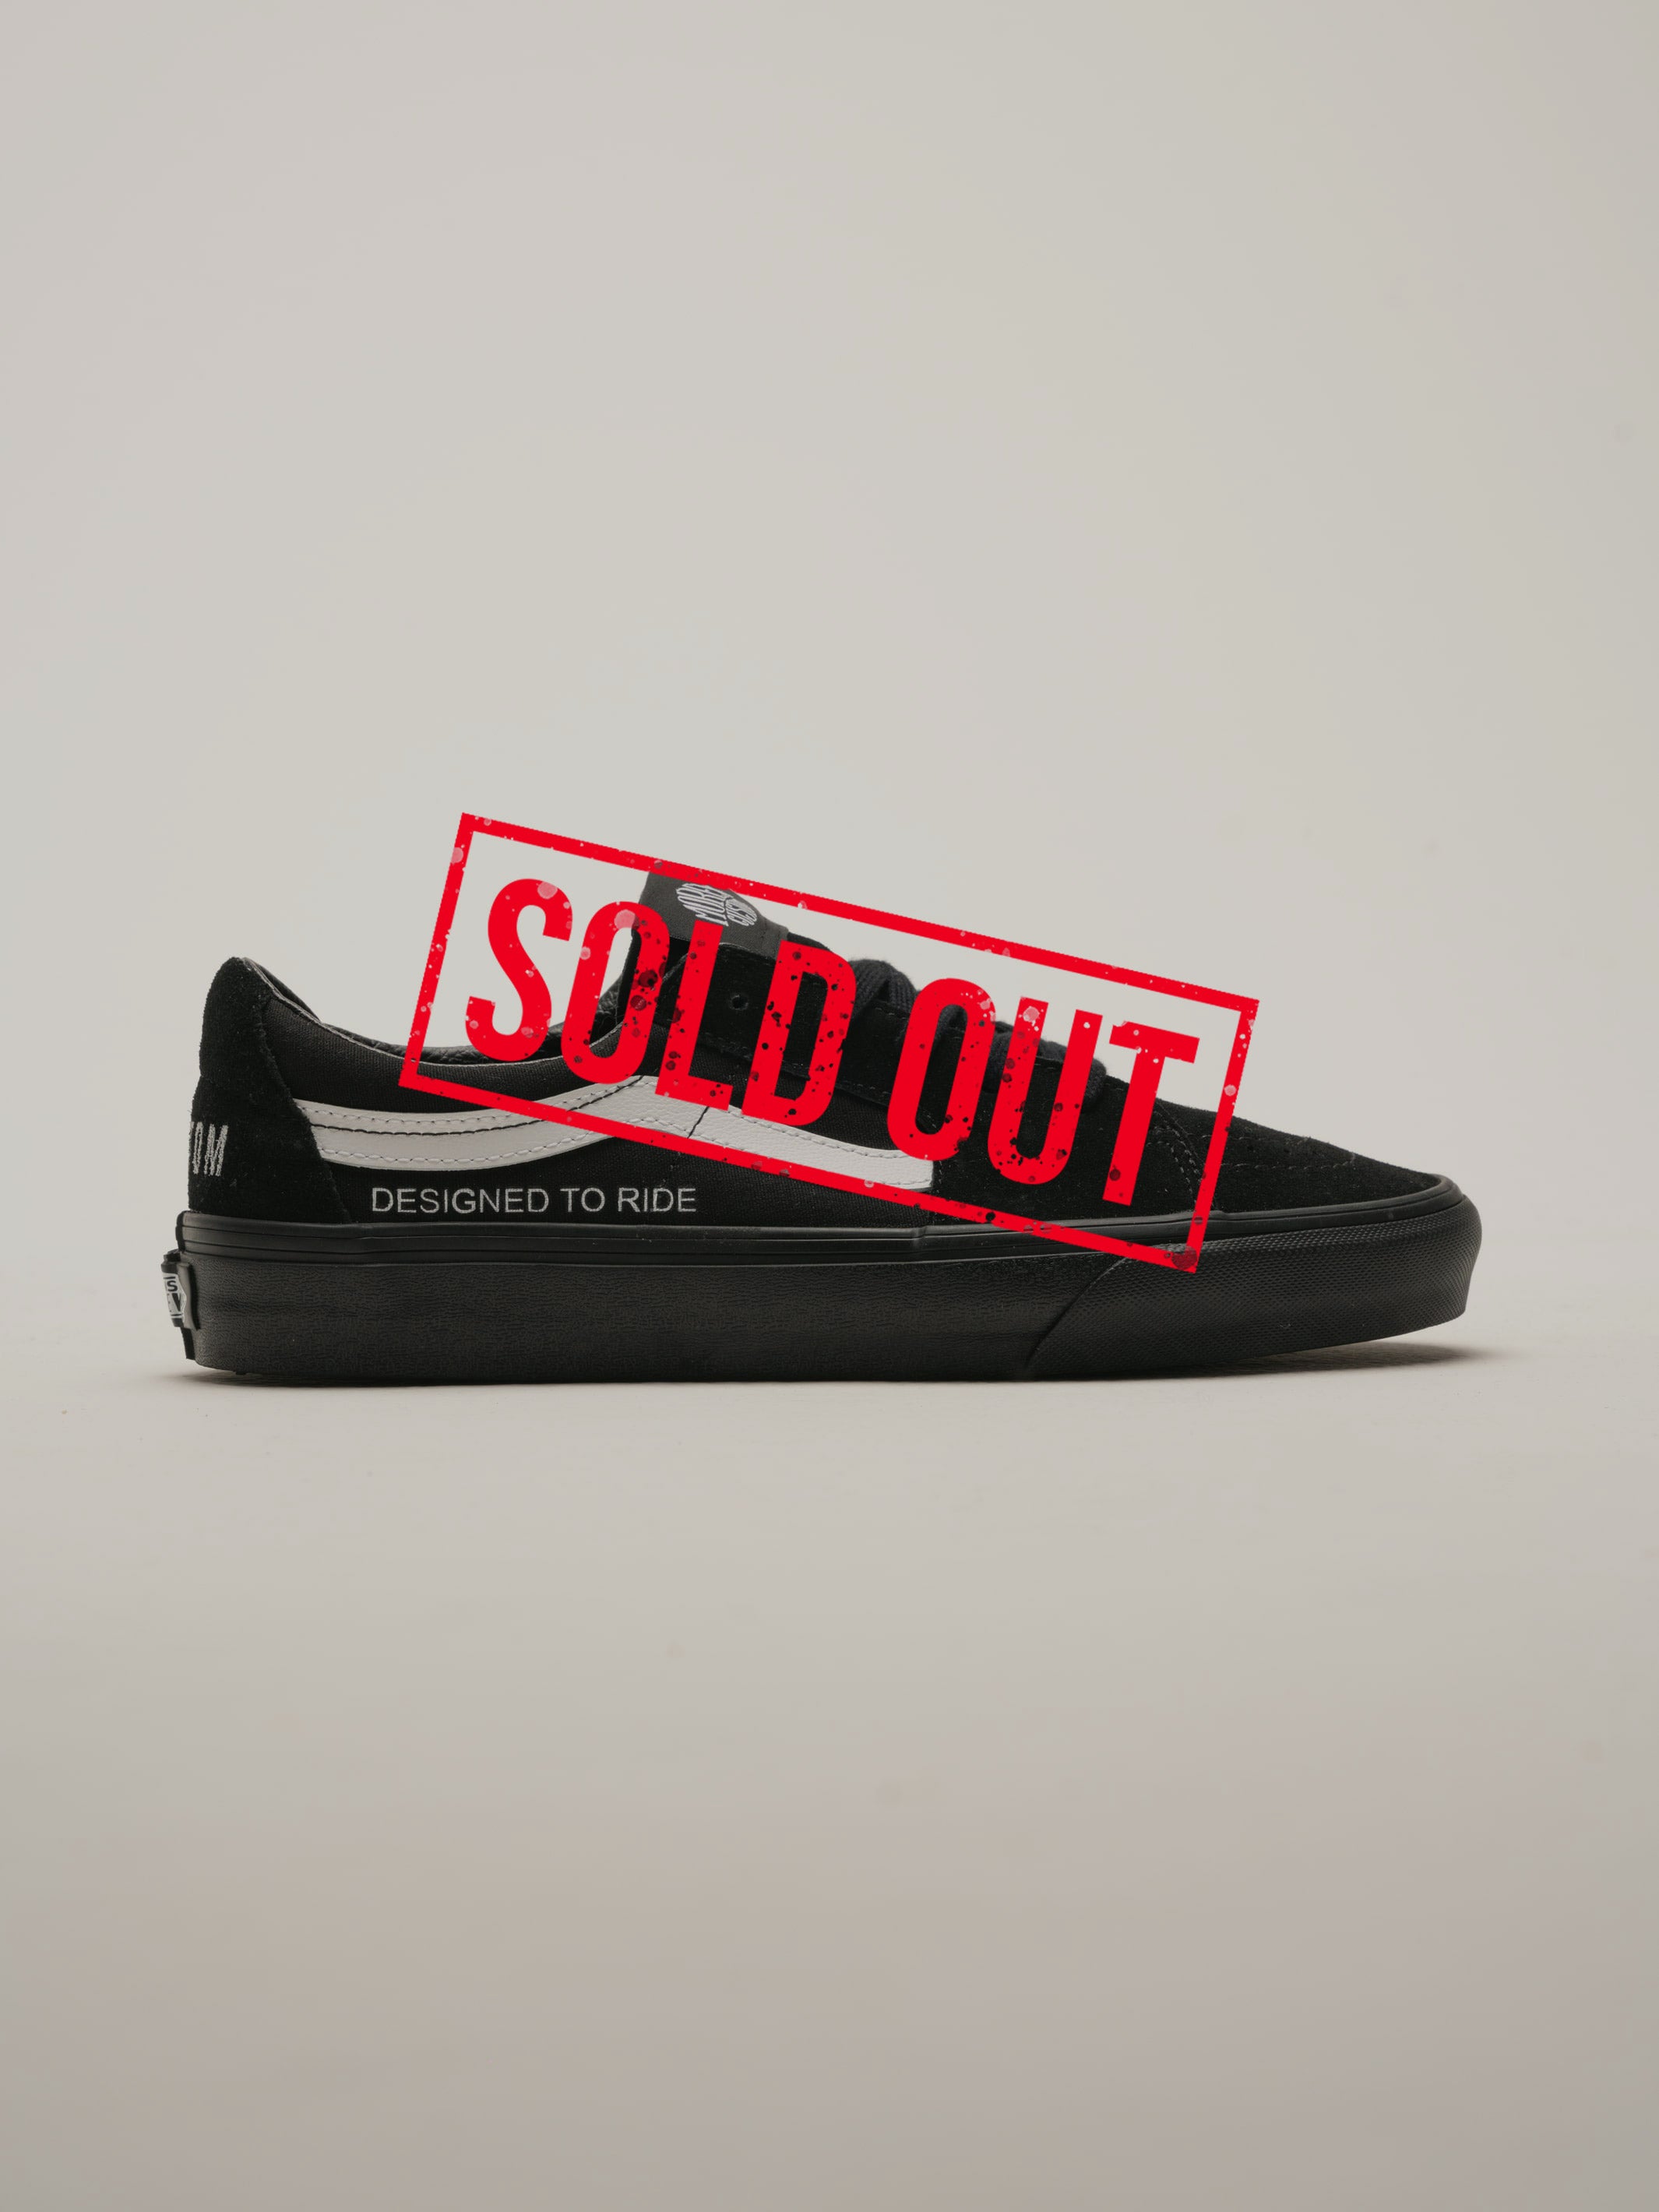 Vans sold out